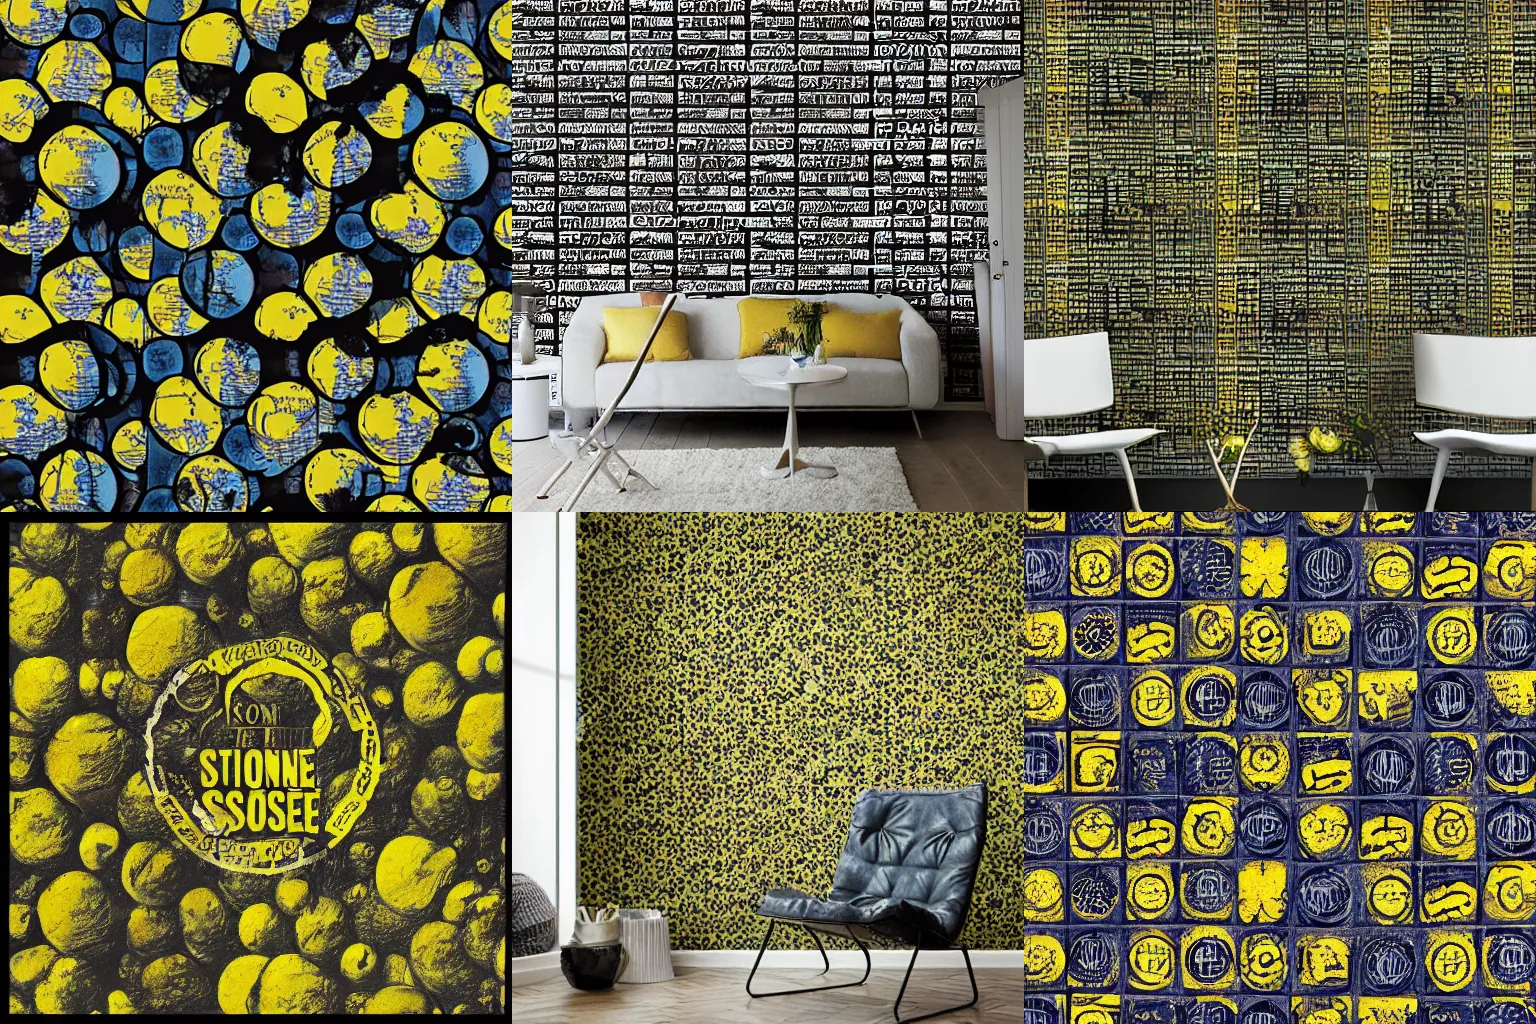 Prompt: stone roses album cover wallpaper in a modern lounge